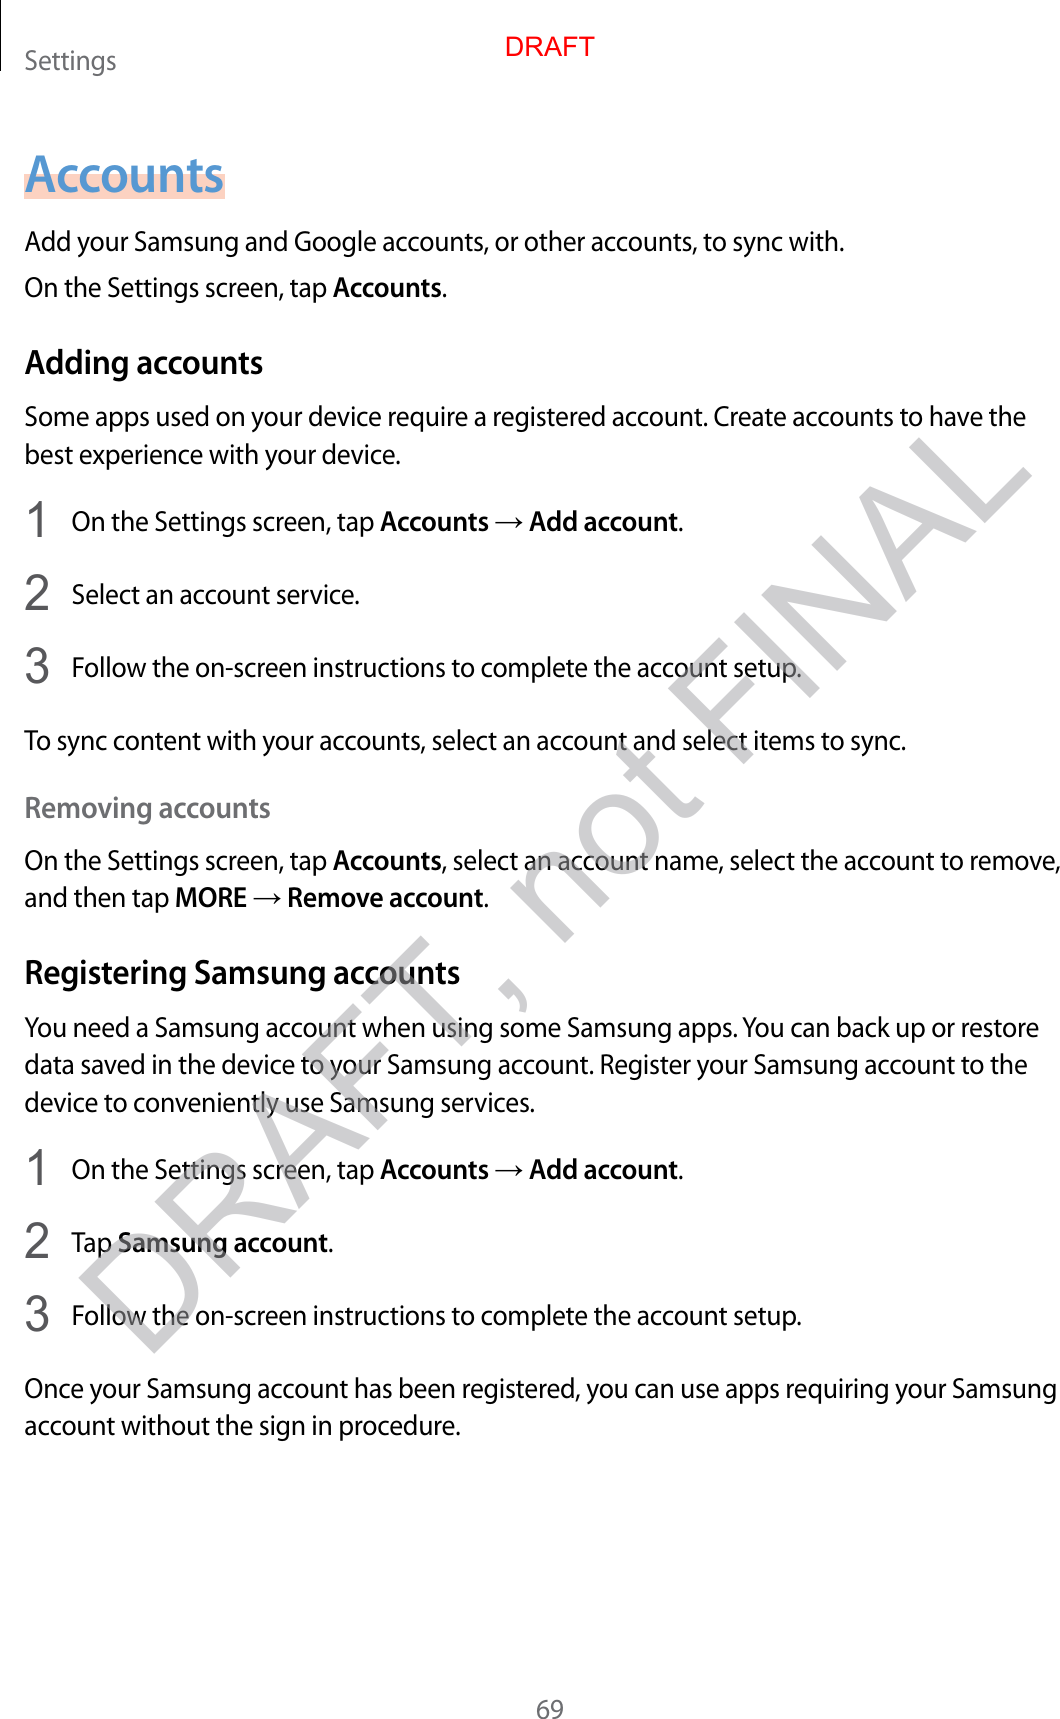 Settings69AccountsAdd your Samsung and Google accounts, or other accounts, to sync with.On the Settings screen, tap Accounts.Adding accountsSome apps used on your device require a registered account. Create accounts to have the best experience with your device.1  On the Settings screen, tap Accounts → Add account.2  Select an account service.3  Follow the on-screen instructions to complete the account setup.To sync content with your accounts, select an account and select items to sync.Removing accountsOn the Settings screen, tap Accounts, select an account name, select the account to remove, and then tap MORE → Remove account.Registering Samsung accountsYou need a Samsung account when using some Samsung apps. You can back up or restore data saved in the device to your Samsung account. Register your Samsung account to the device to conveniently use Samsung services.1  On the Settings screen, tap Accounts → Add account.2  Tap Samsung account.3  Follow the on-screen instructions to complete the account setup.Once your Samsung account has been registered, you can use apps requiring your Samsung account without the sign in procedure.DRAFTDRAFT, not FINAL